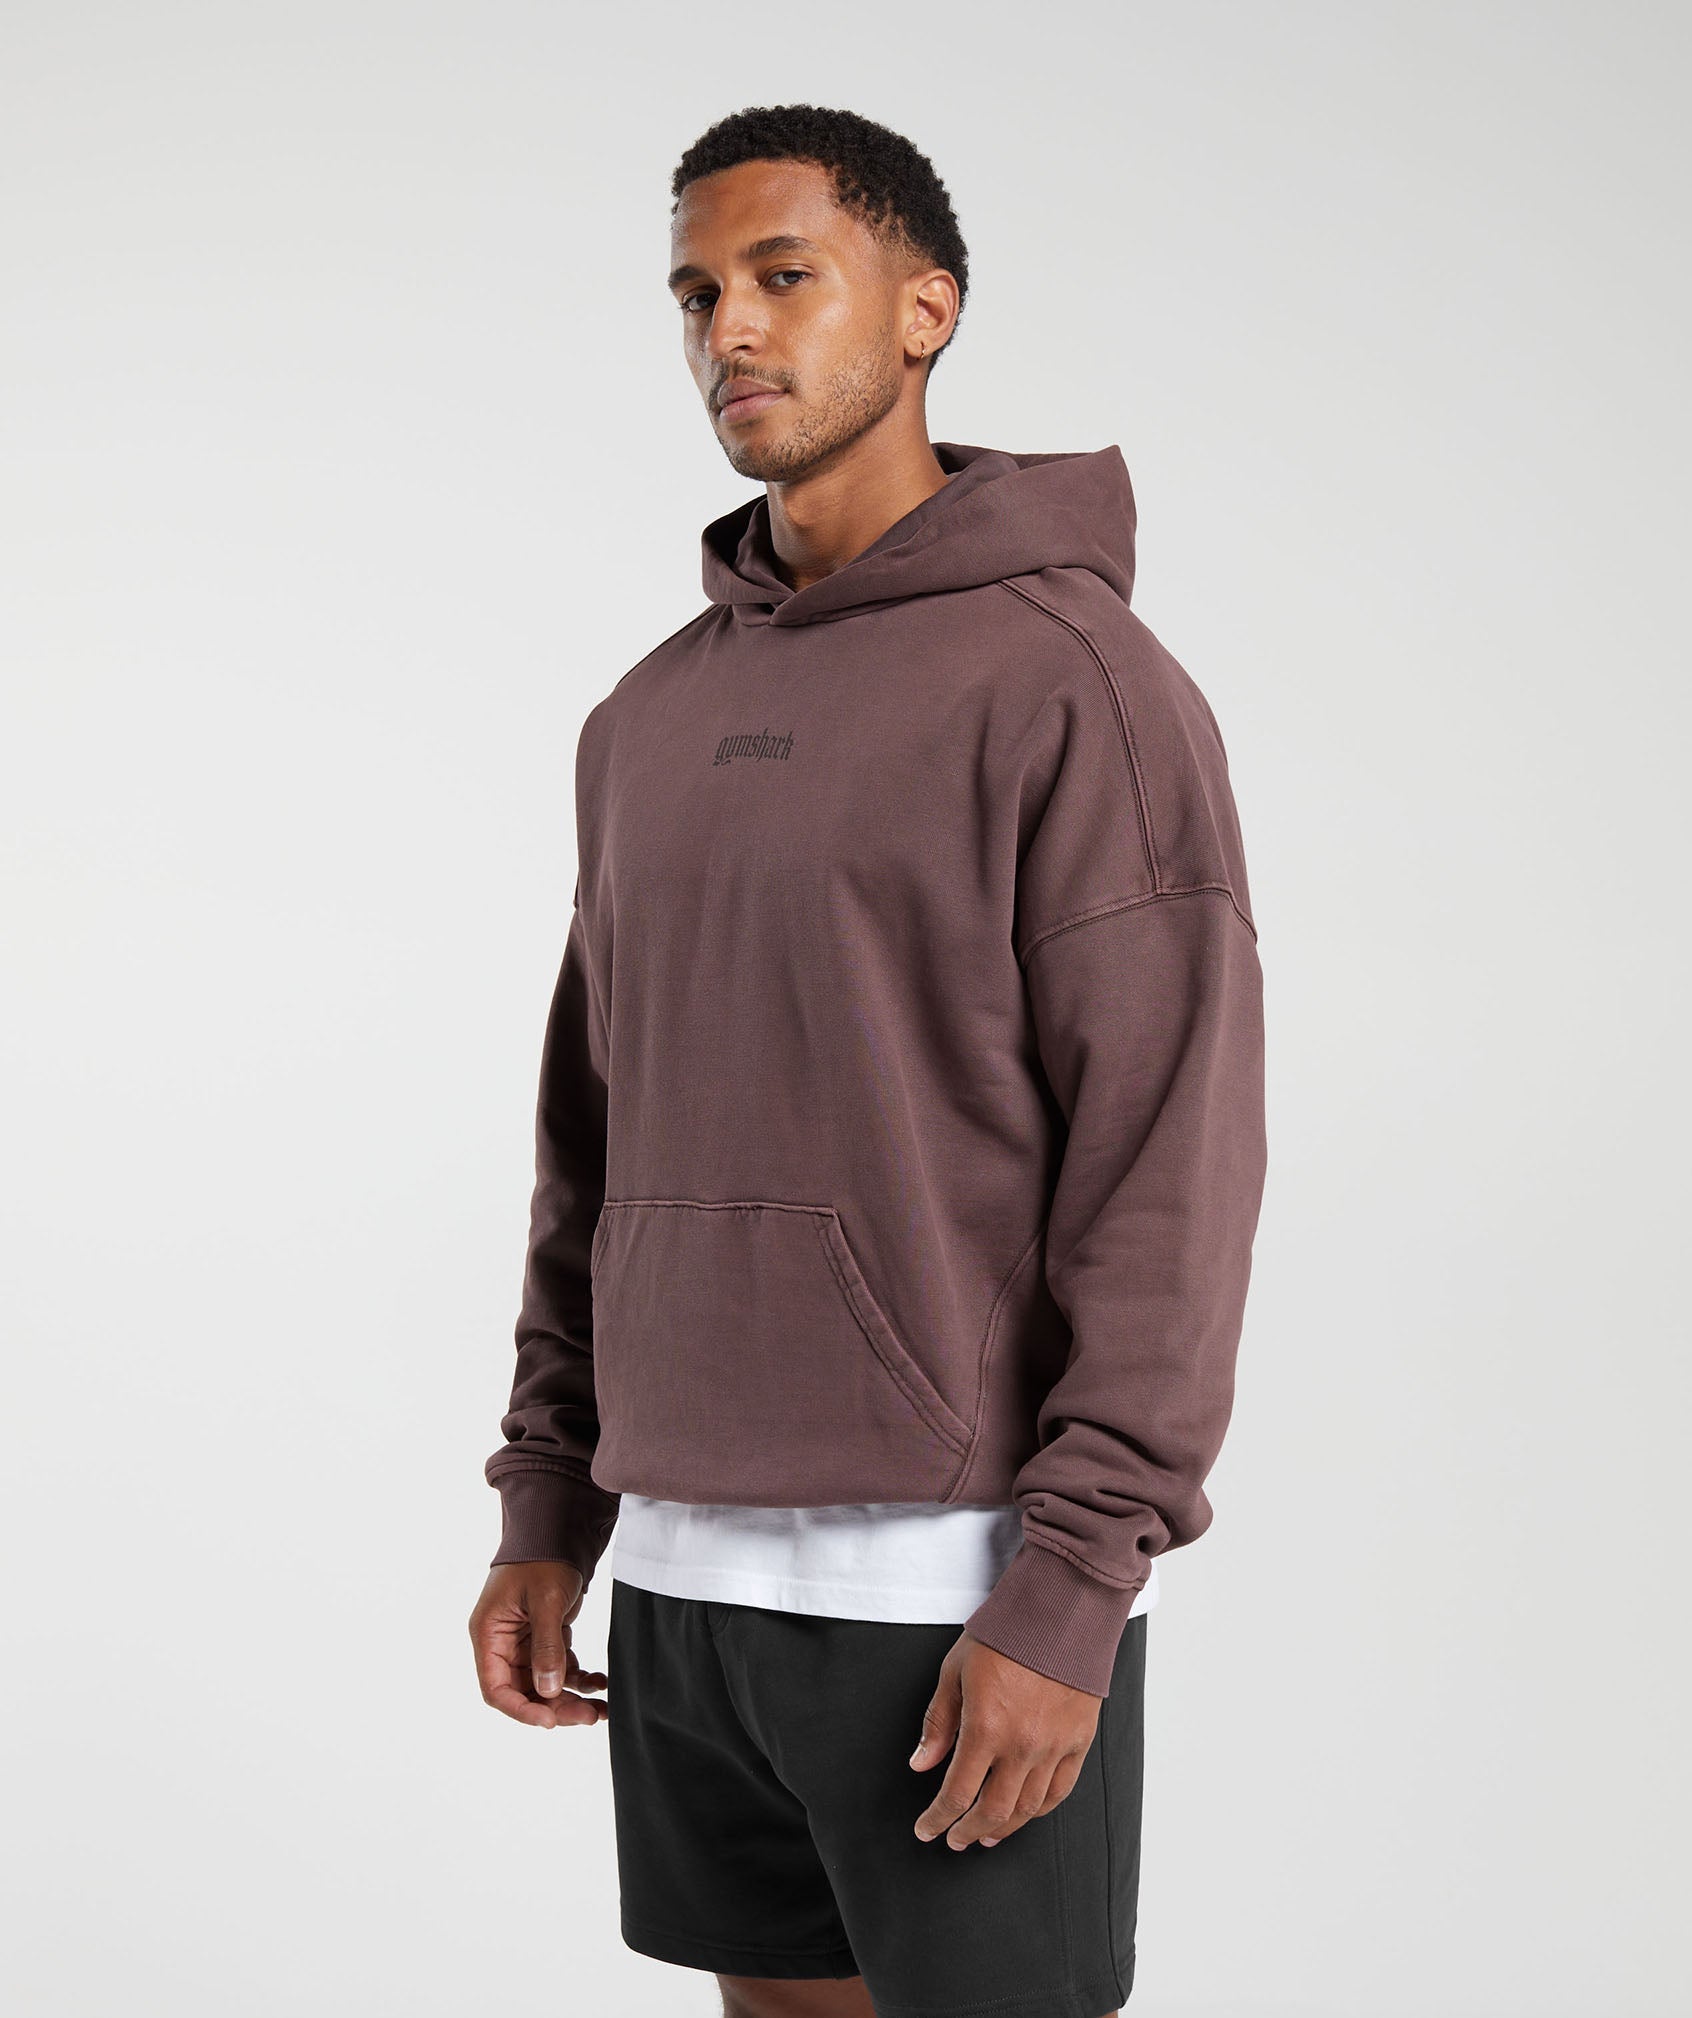 Heavyweight Hoodie in Cocoa Brown - view 3